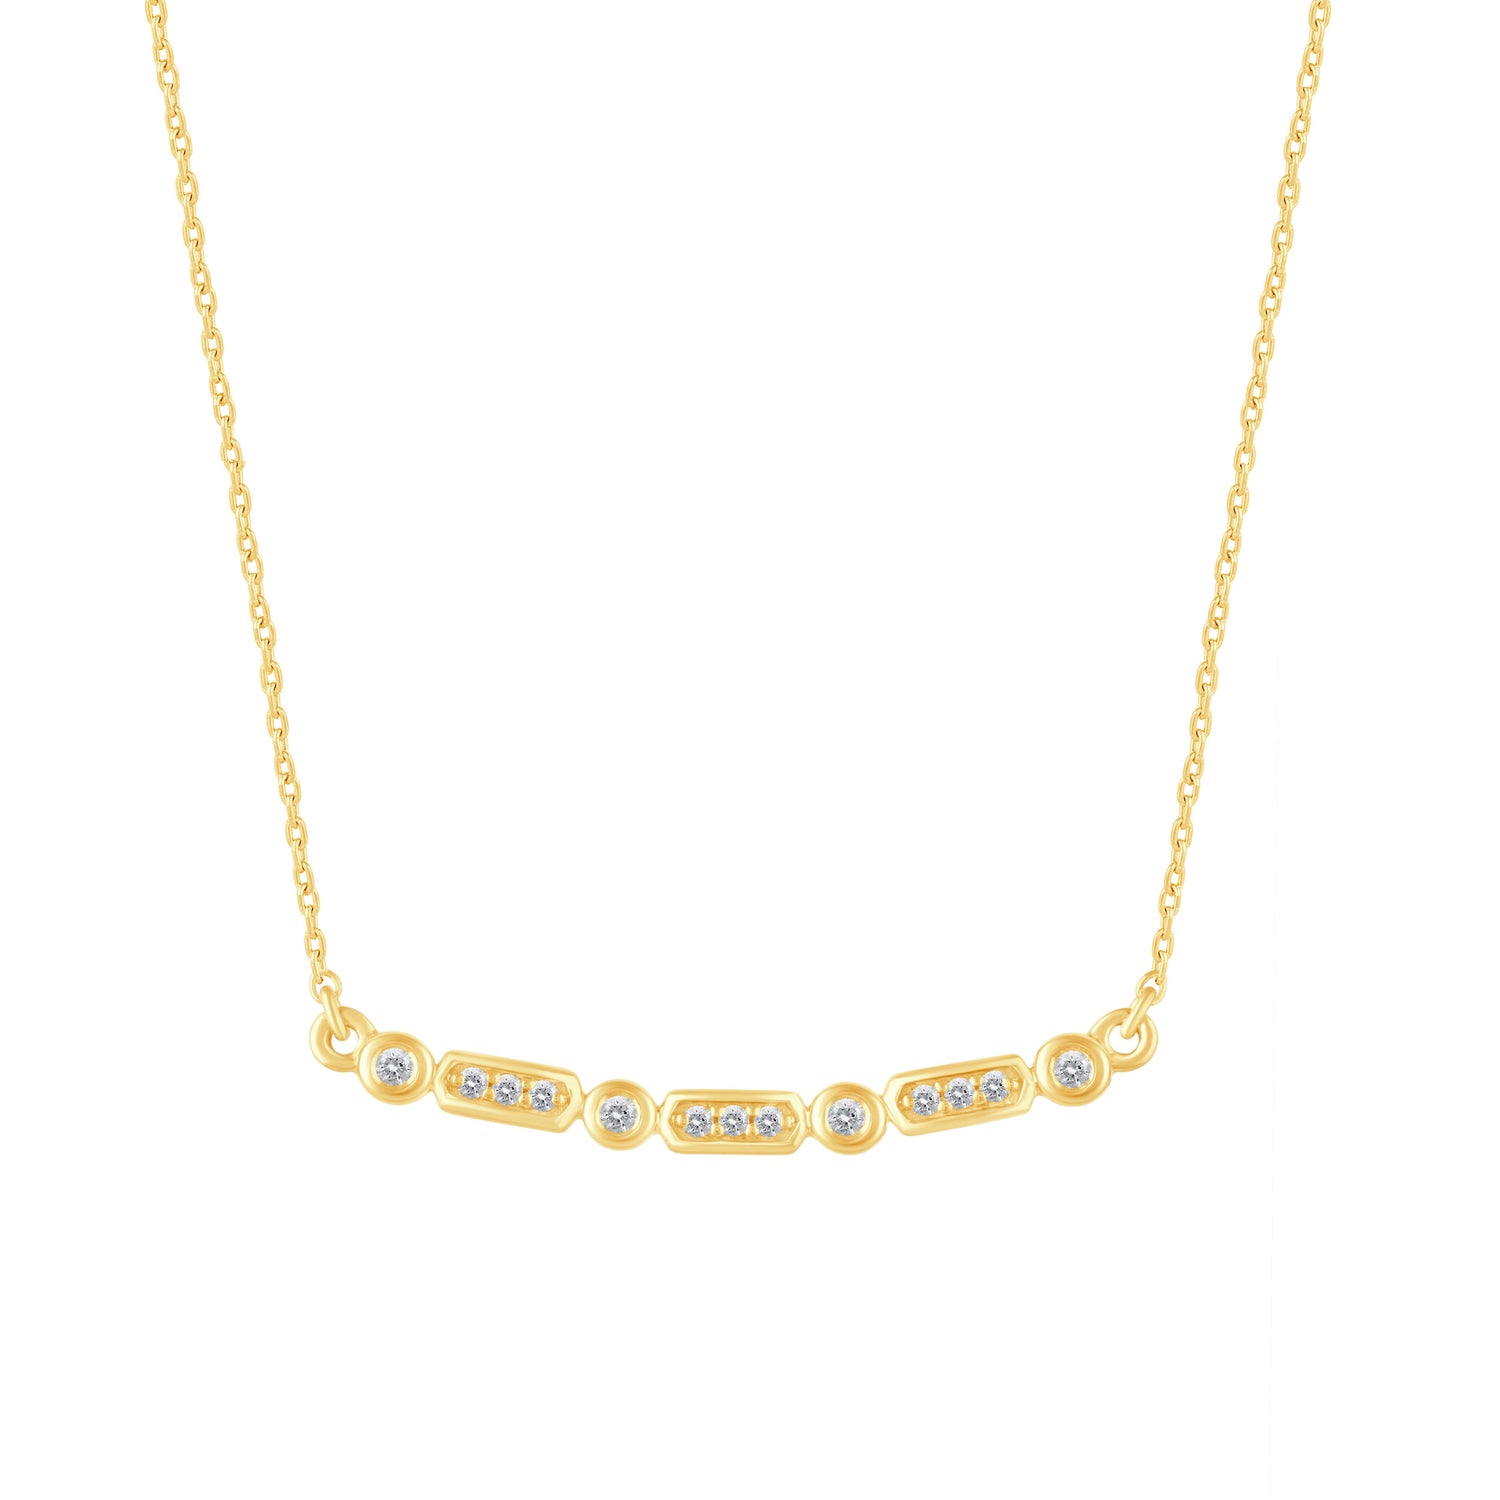 1/10 Cttw Diamond Mosaic Bar Pendant Necklace set in 925 Sterling Silver 14K Yellow Gold Plating